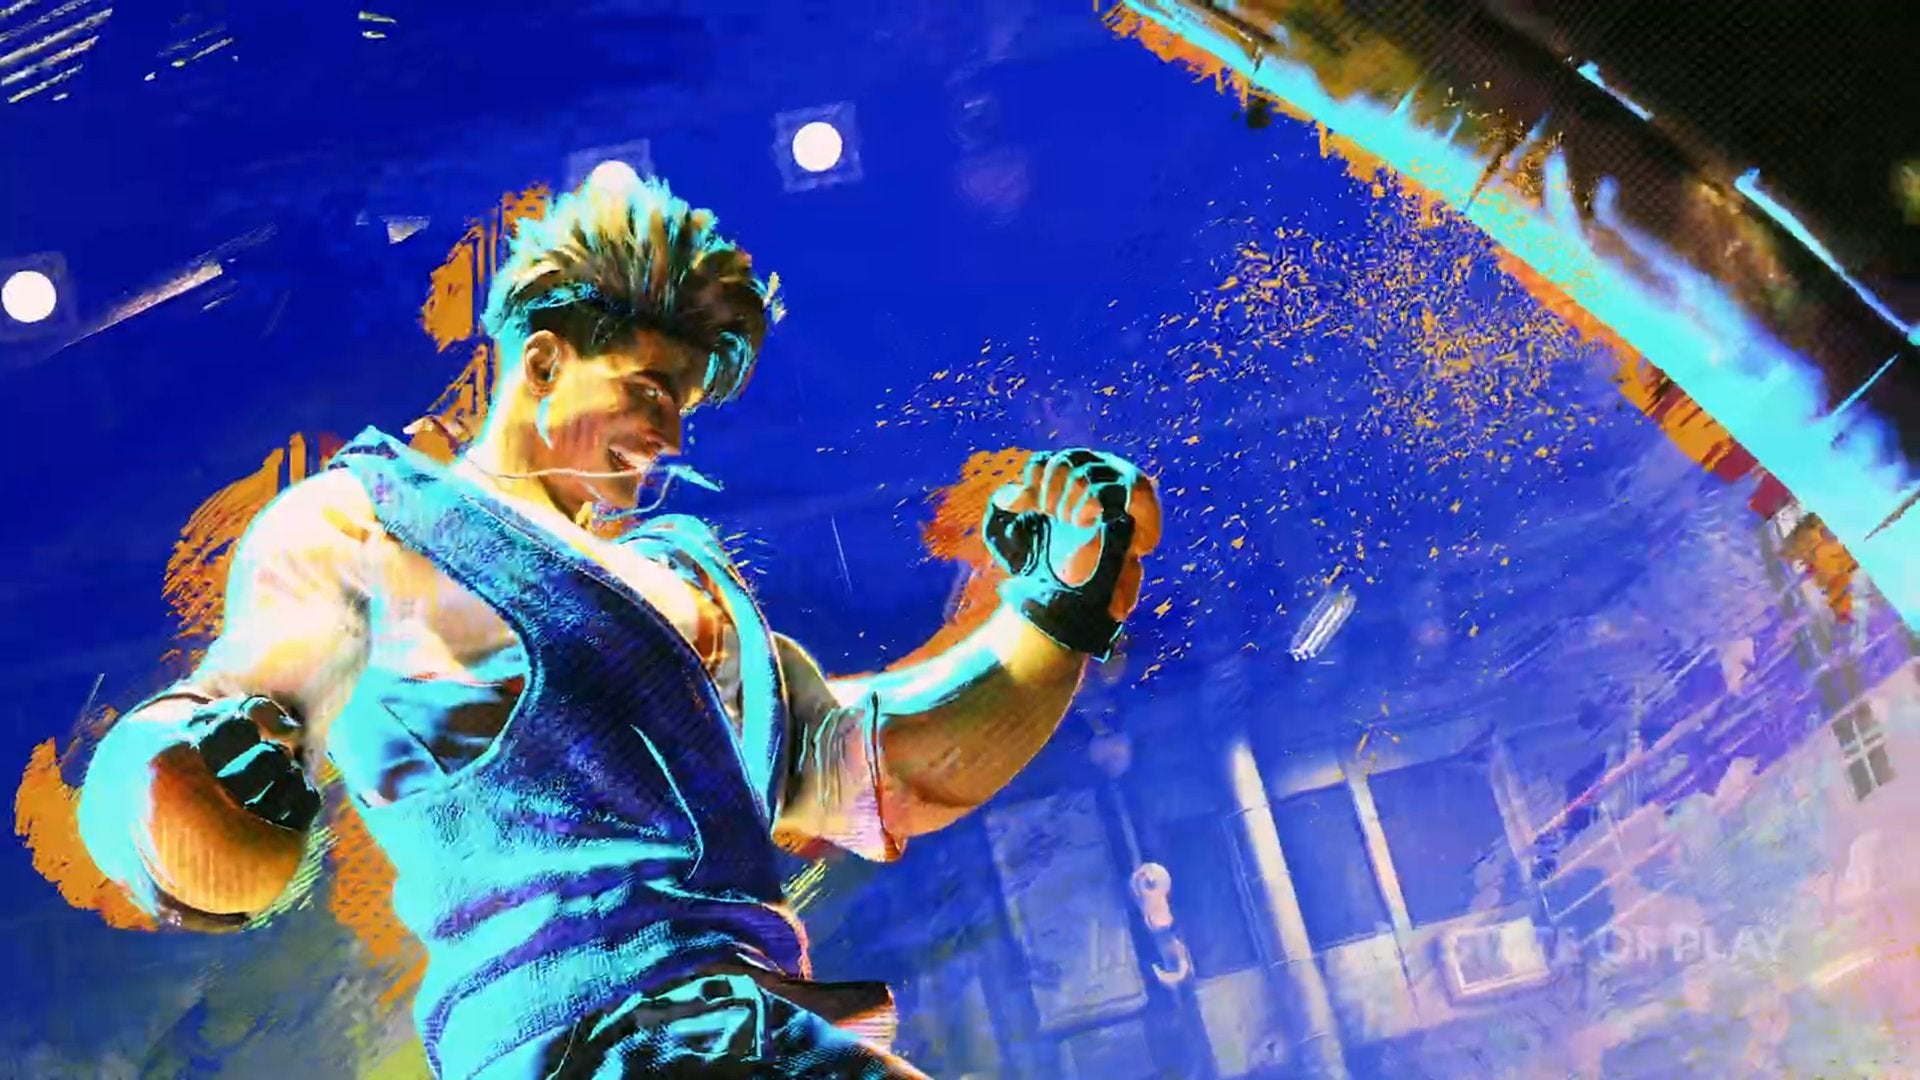 Image for Capcom shows off first look at Street Fighter 6 gameplay, release date set for 2023